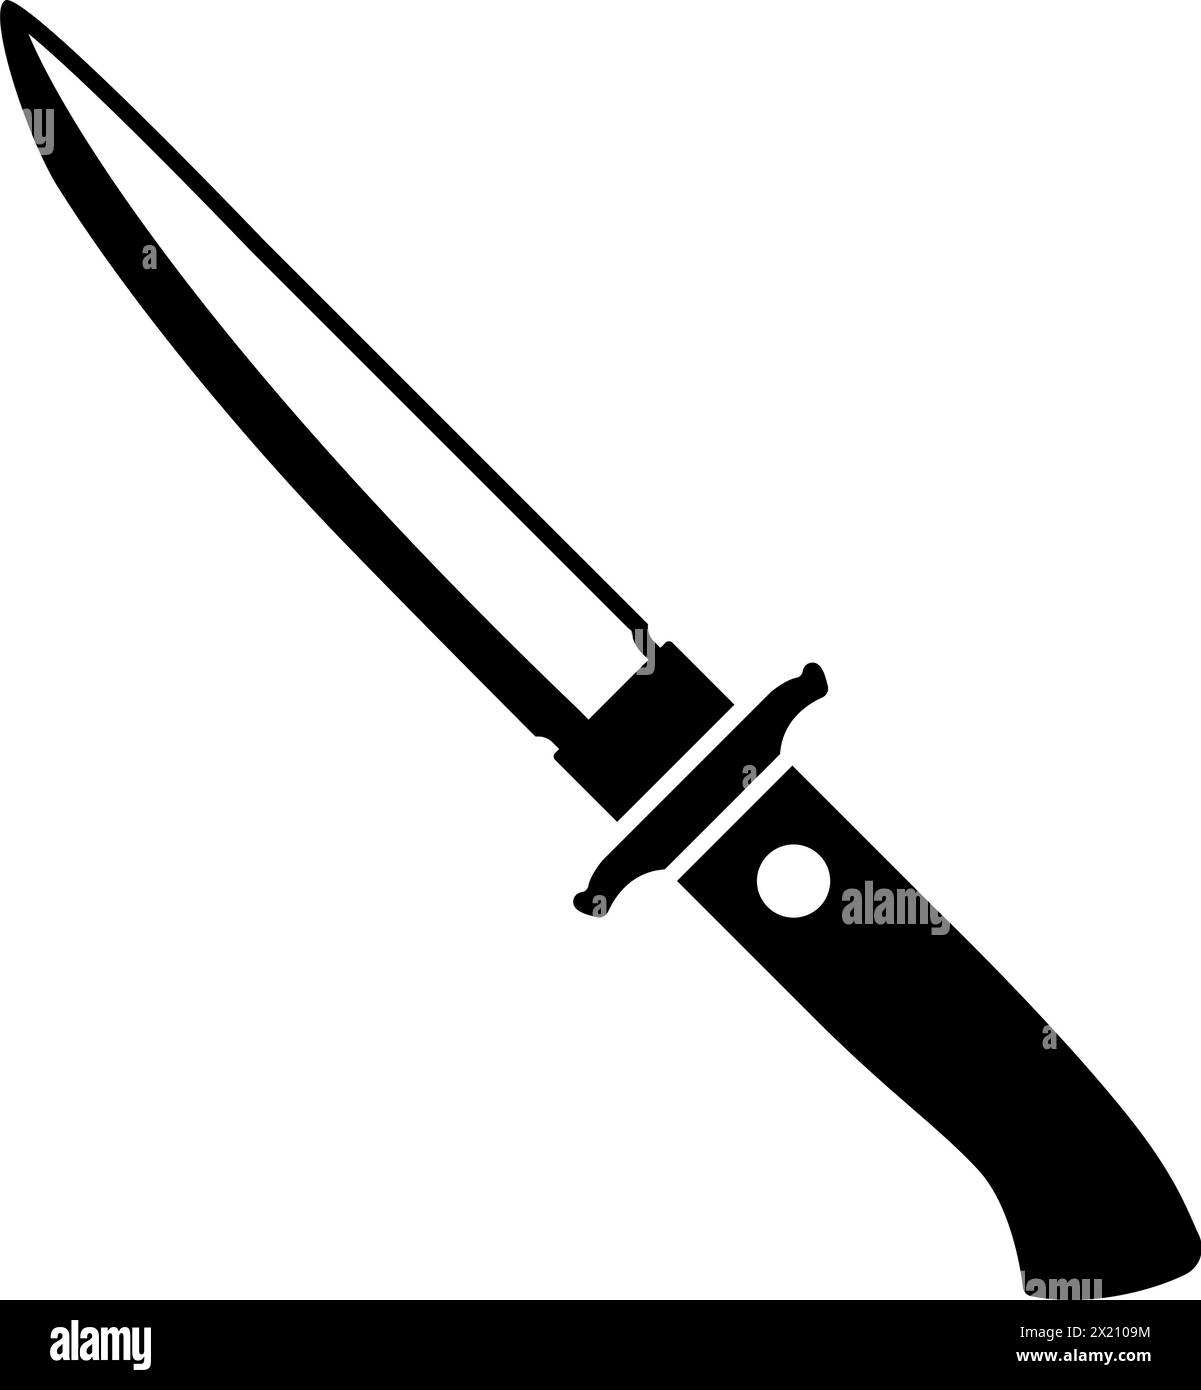 Martial arts weapons: knife dagger icon isolated Stock Vector